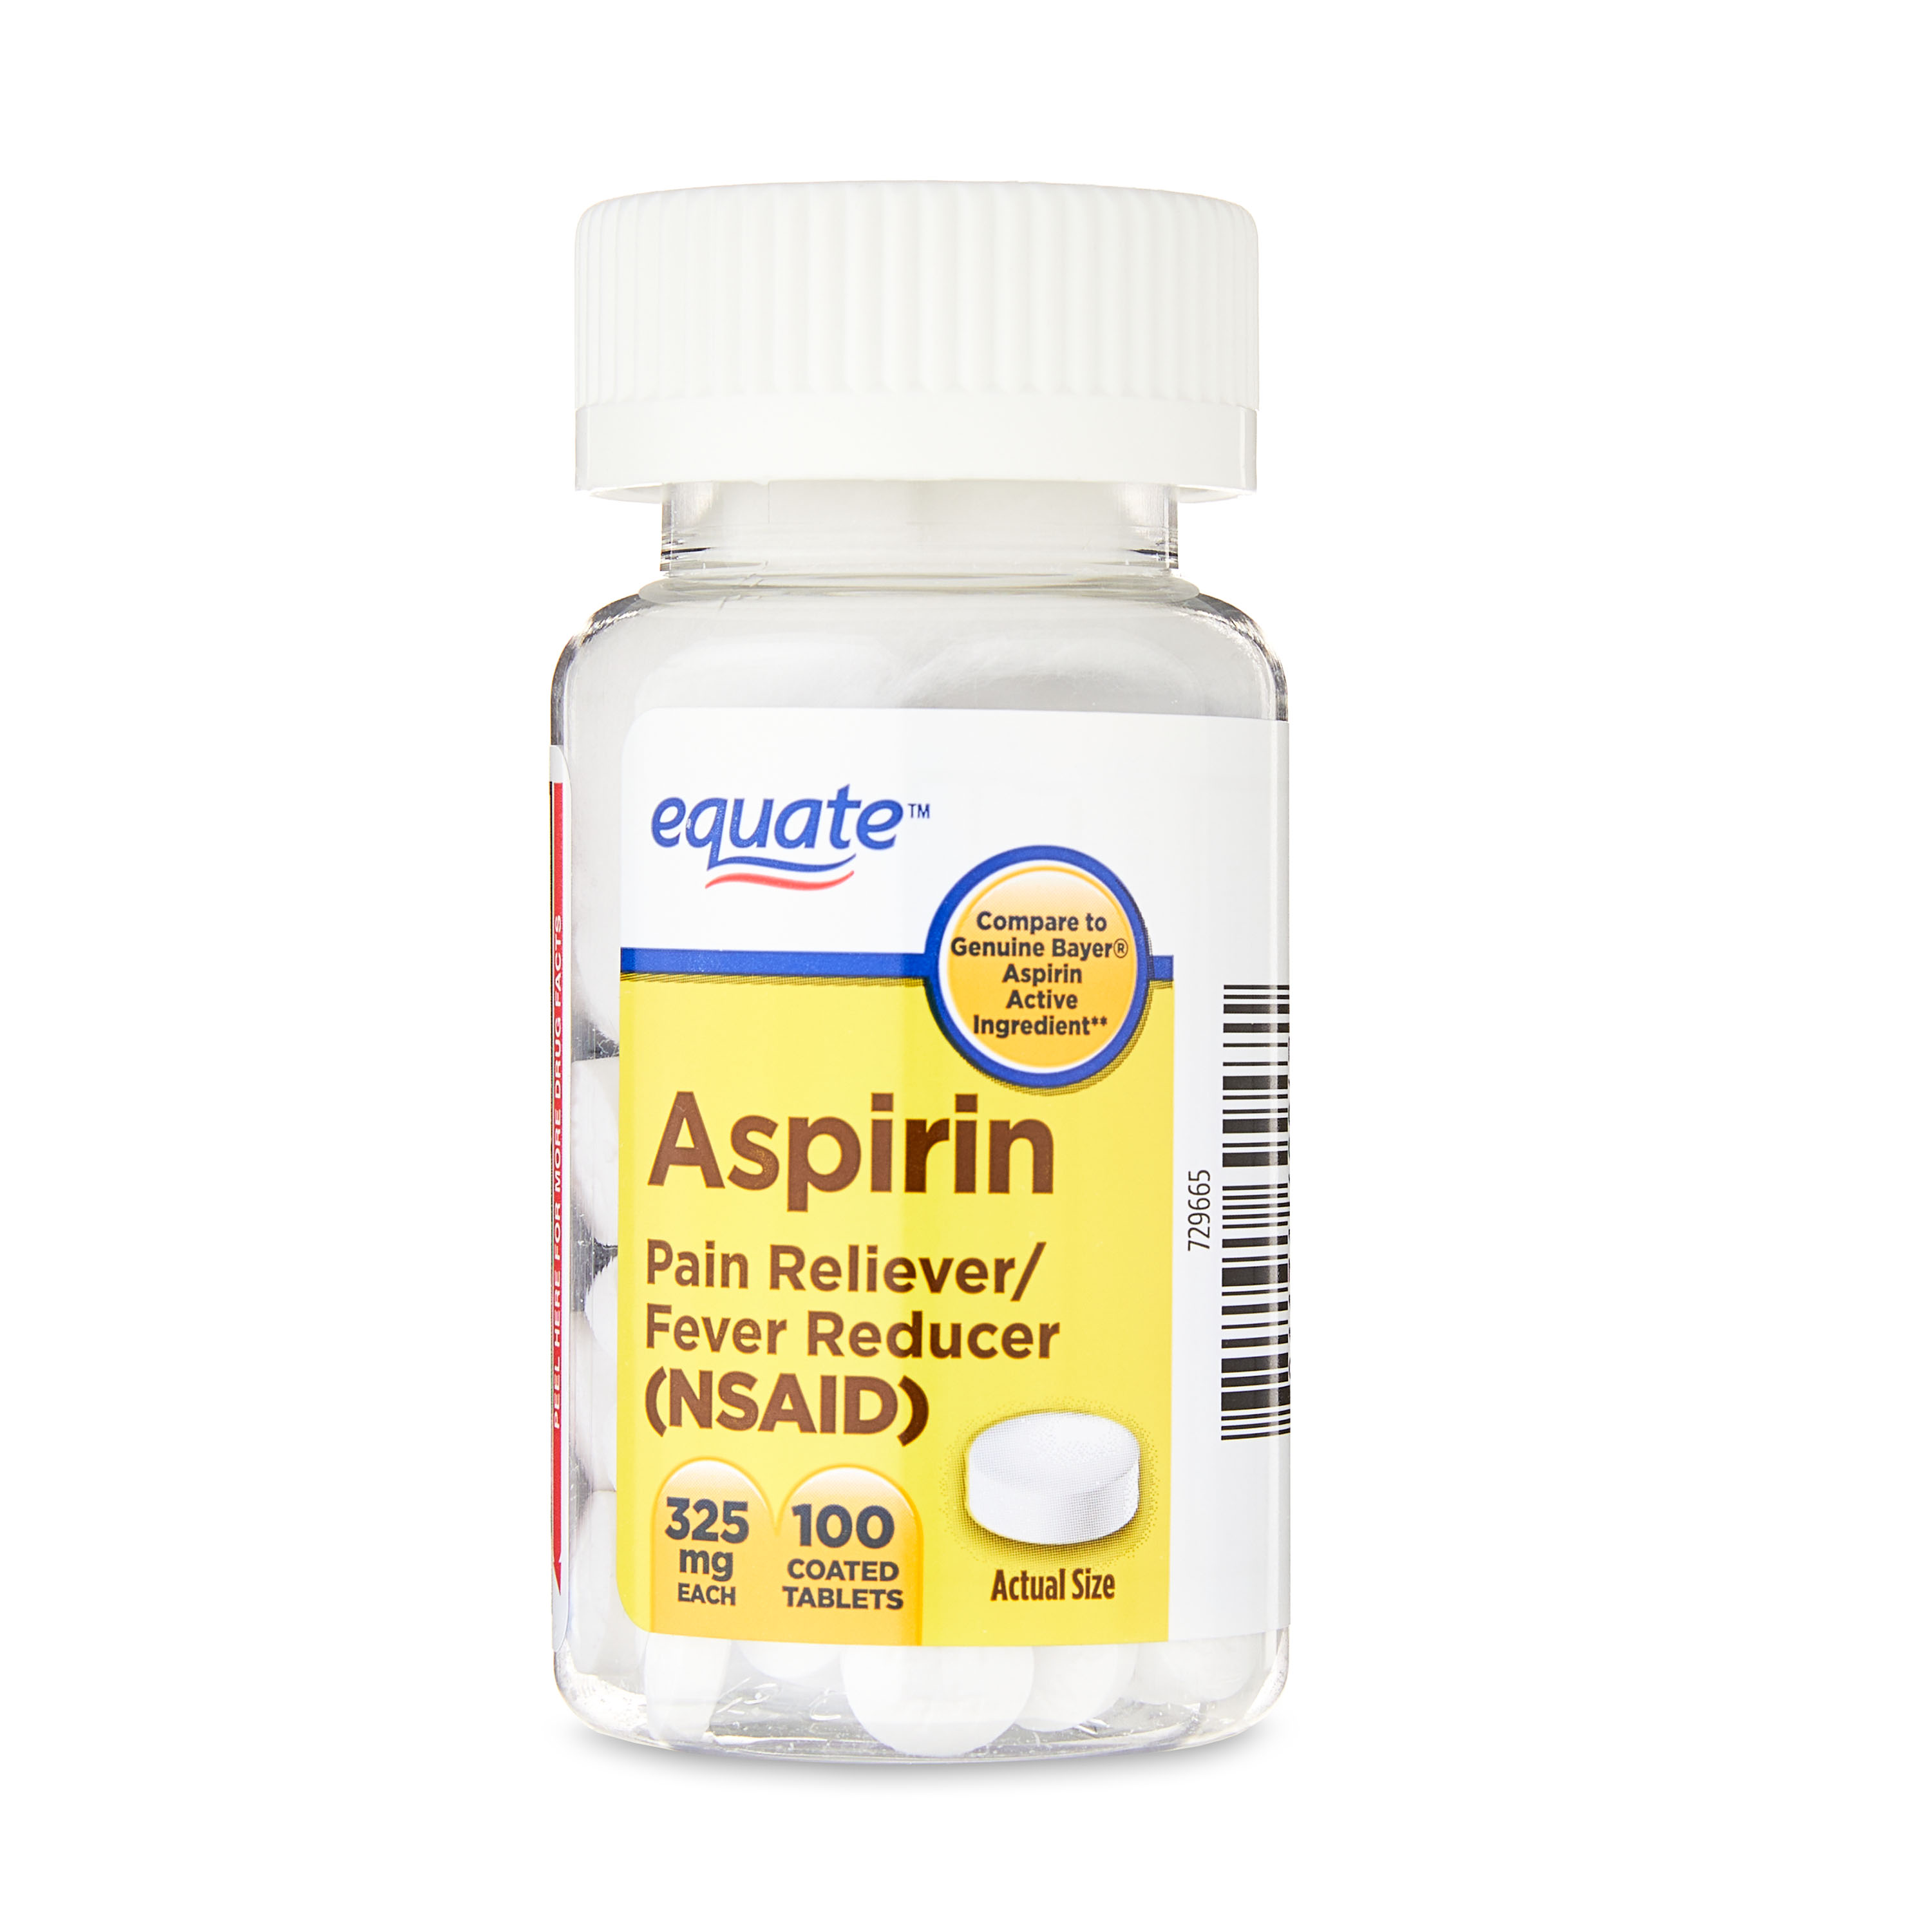 Equate Aspirin Pain Reliever/Fever Reducer Coated Tablets, 325 mg, 100 Count - image 1 of 9